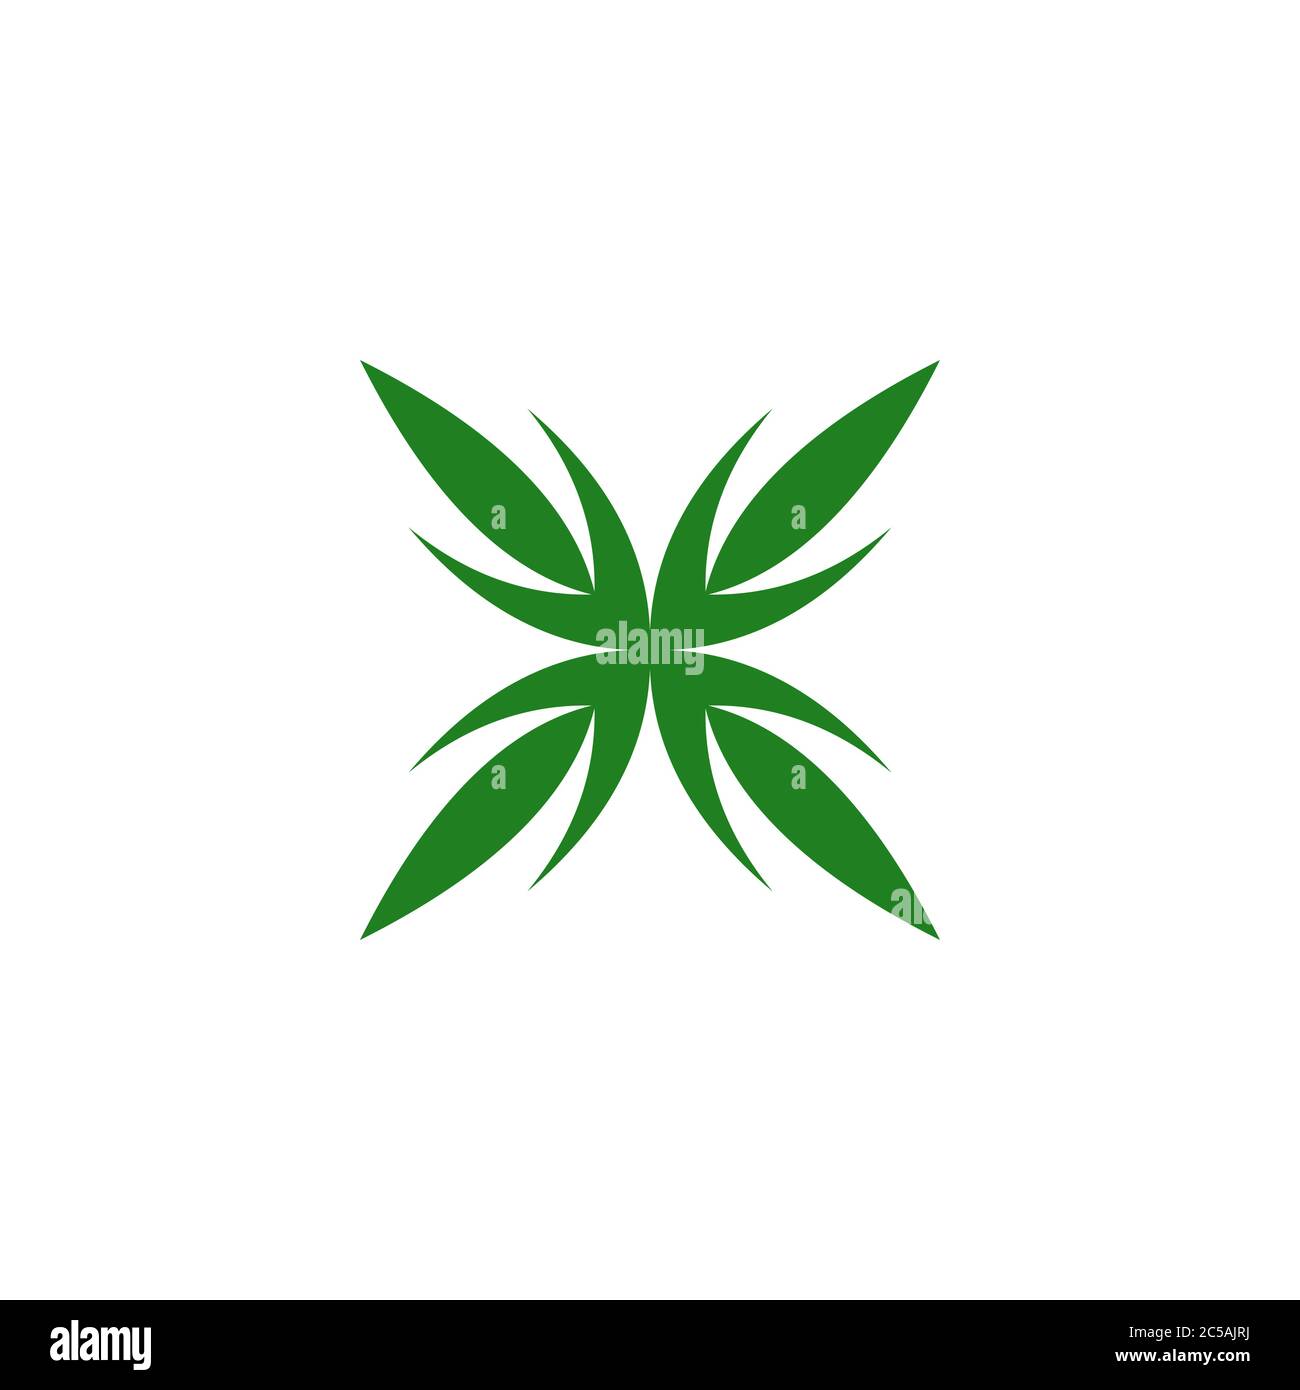 Green leaf graphic vector, Marijuana cannabis logo design concept, isolated on white background. Stock Vector